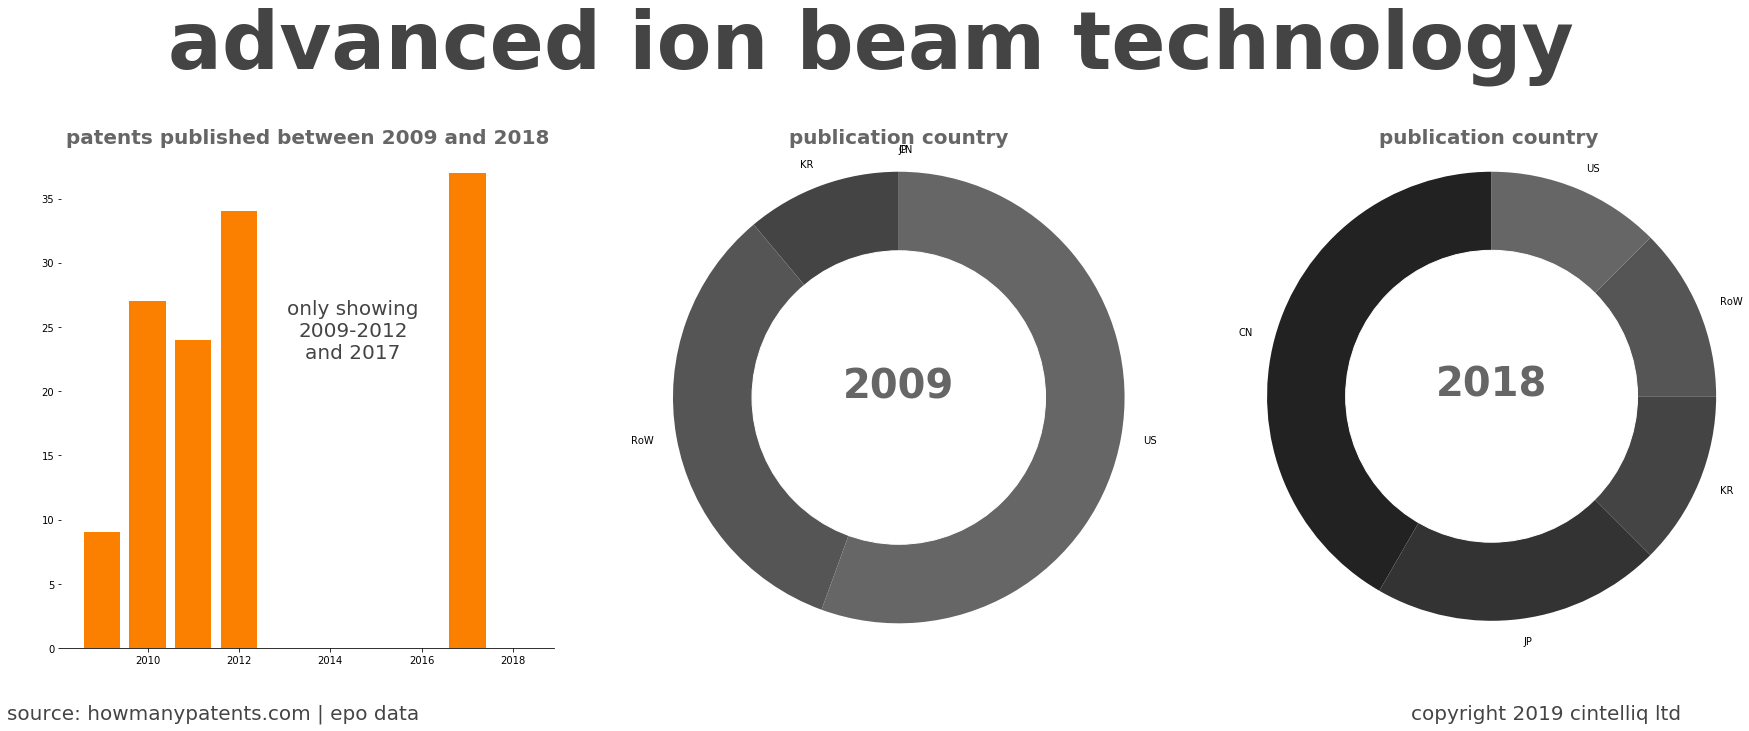 summary of patents for Advanced Ion Beam Technology